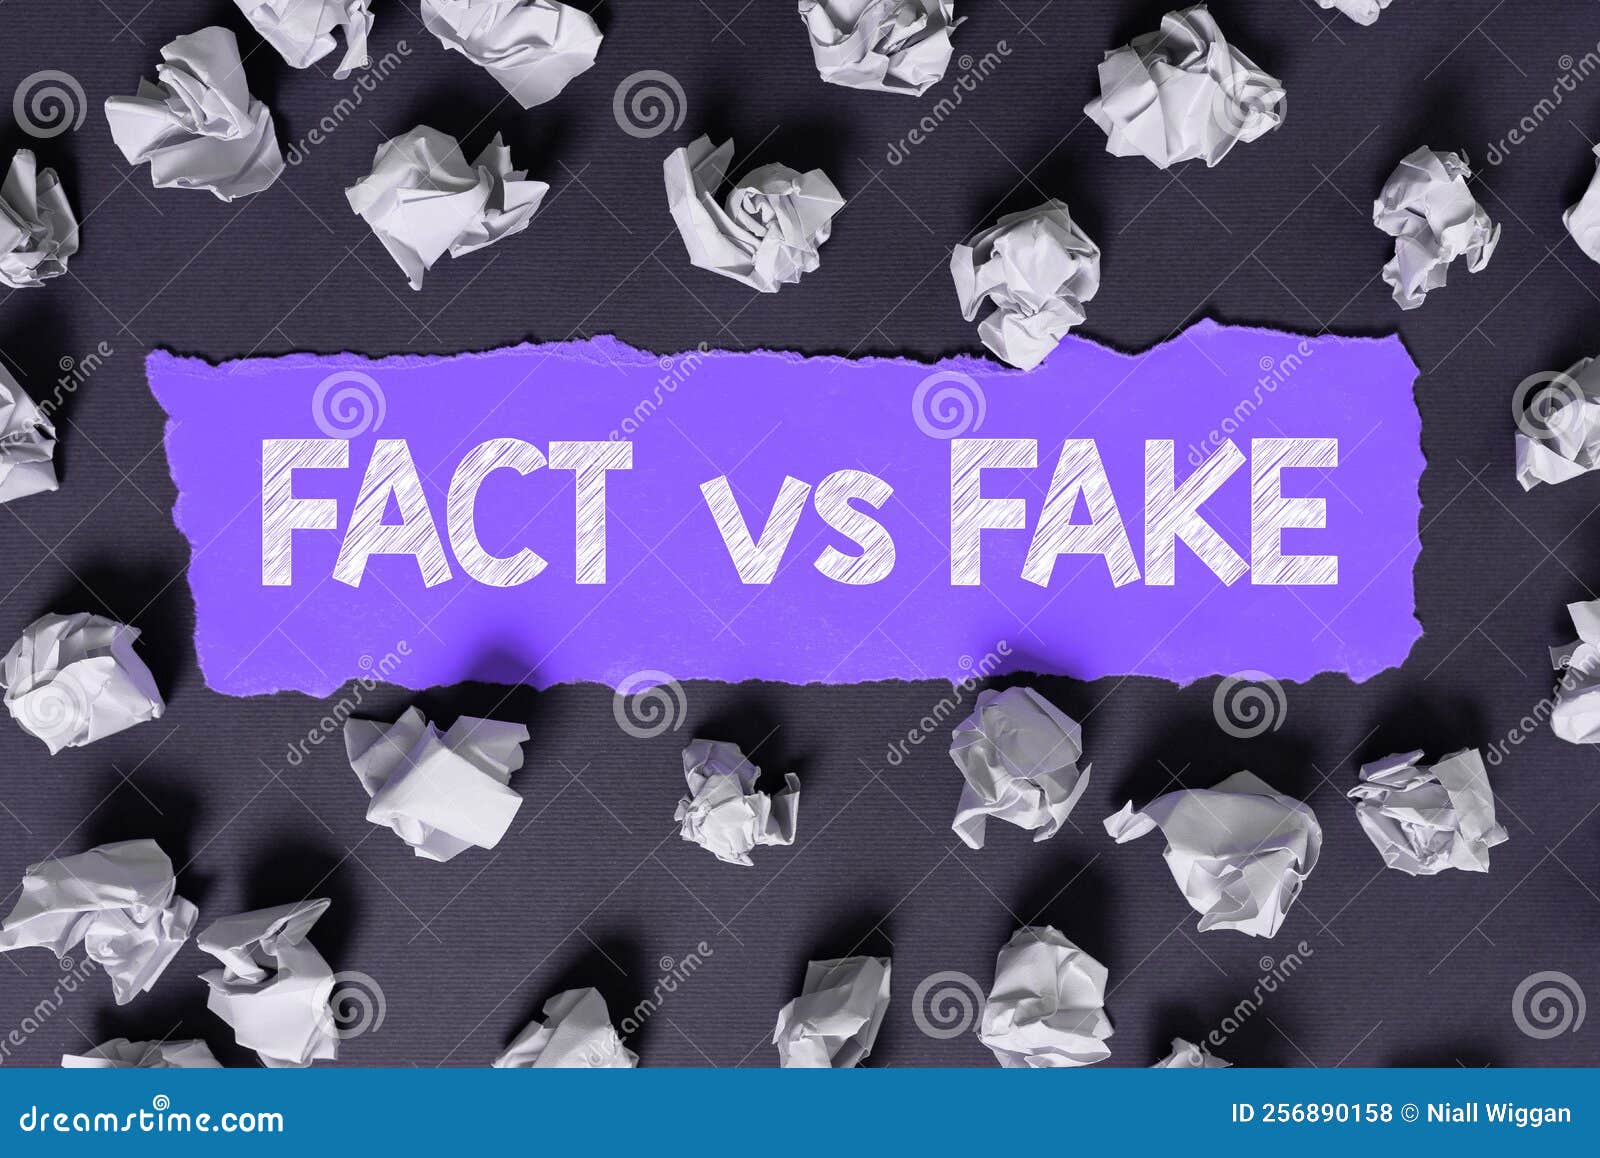 text sign showing fact vs fake. business approach rivalry or products or information originaly made or imitation